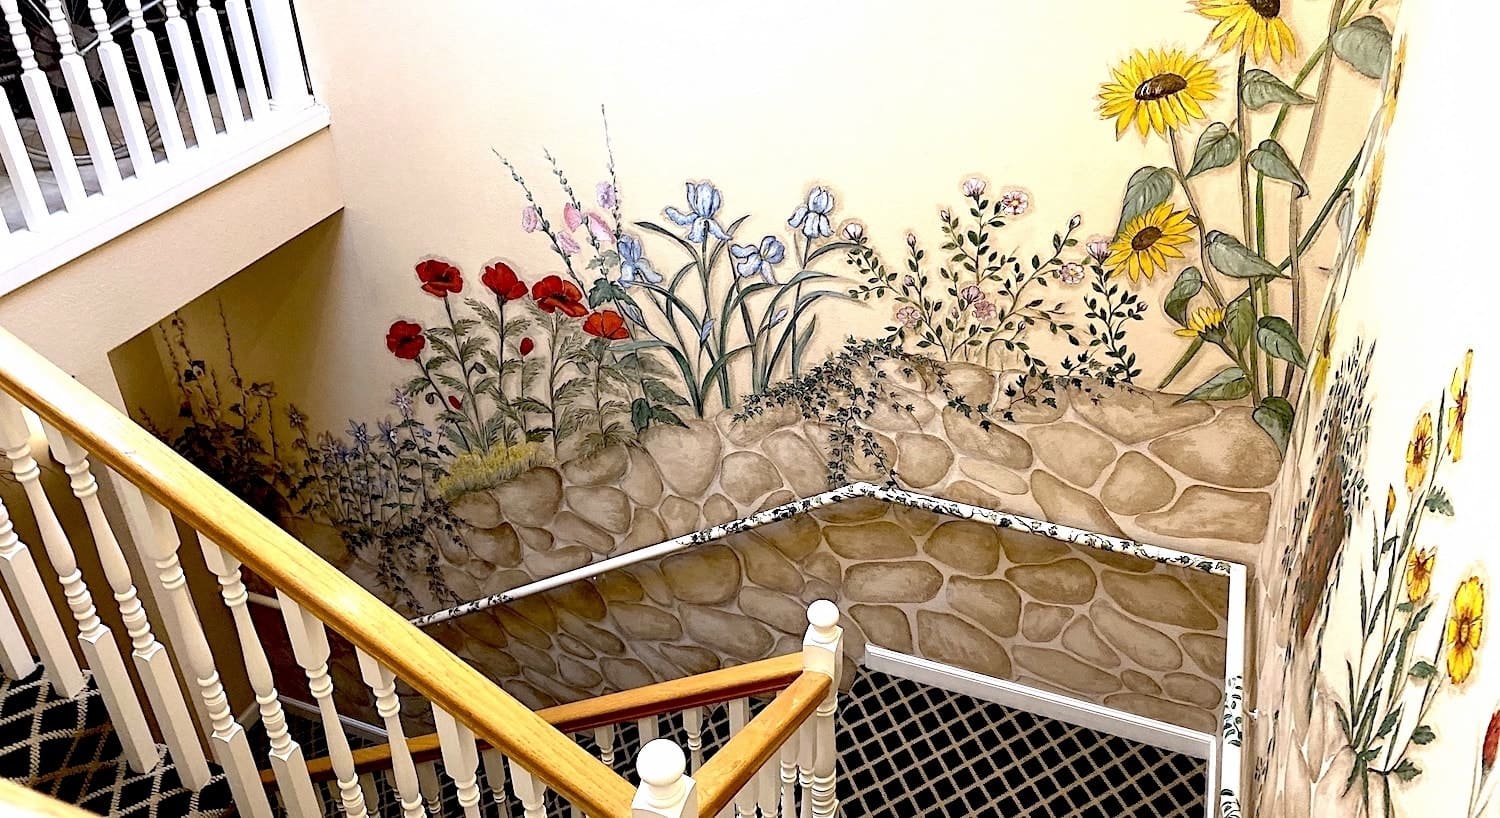 Stairwell with handpainted stones and flowers on the wall